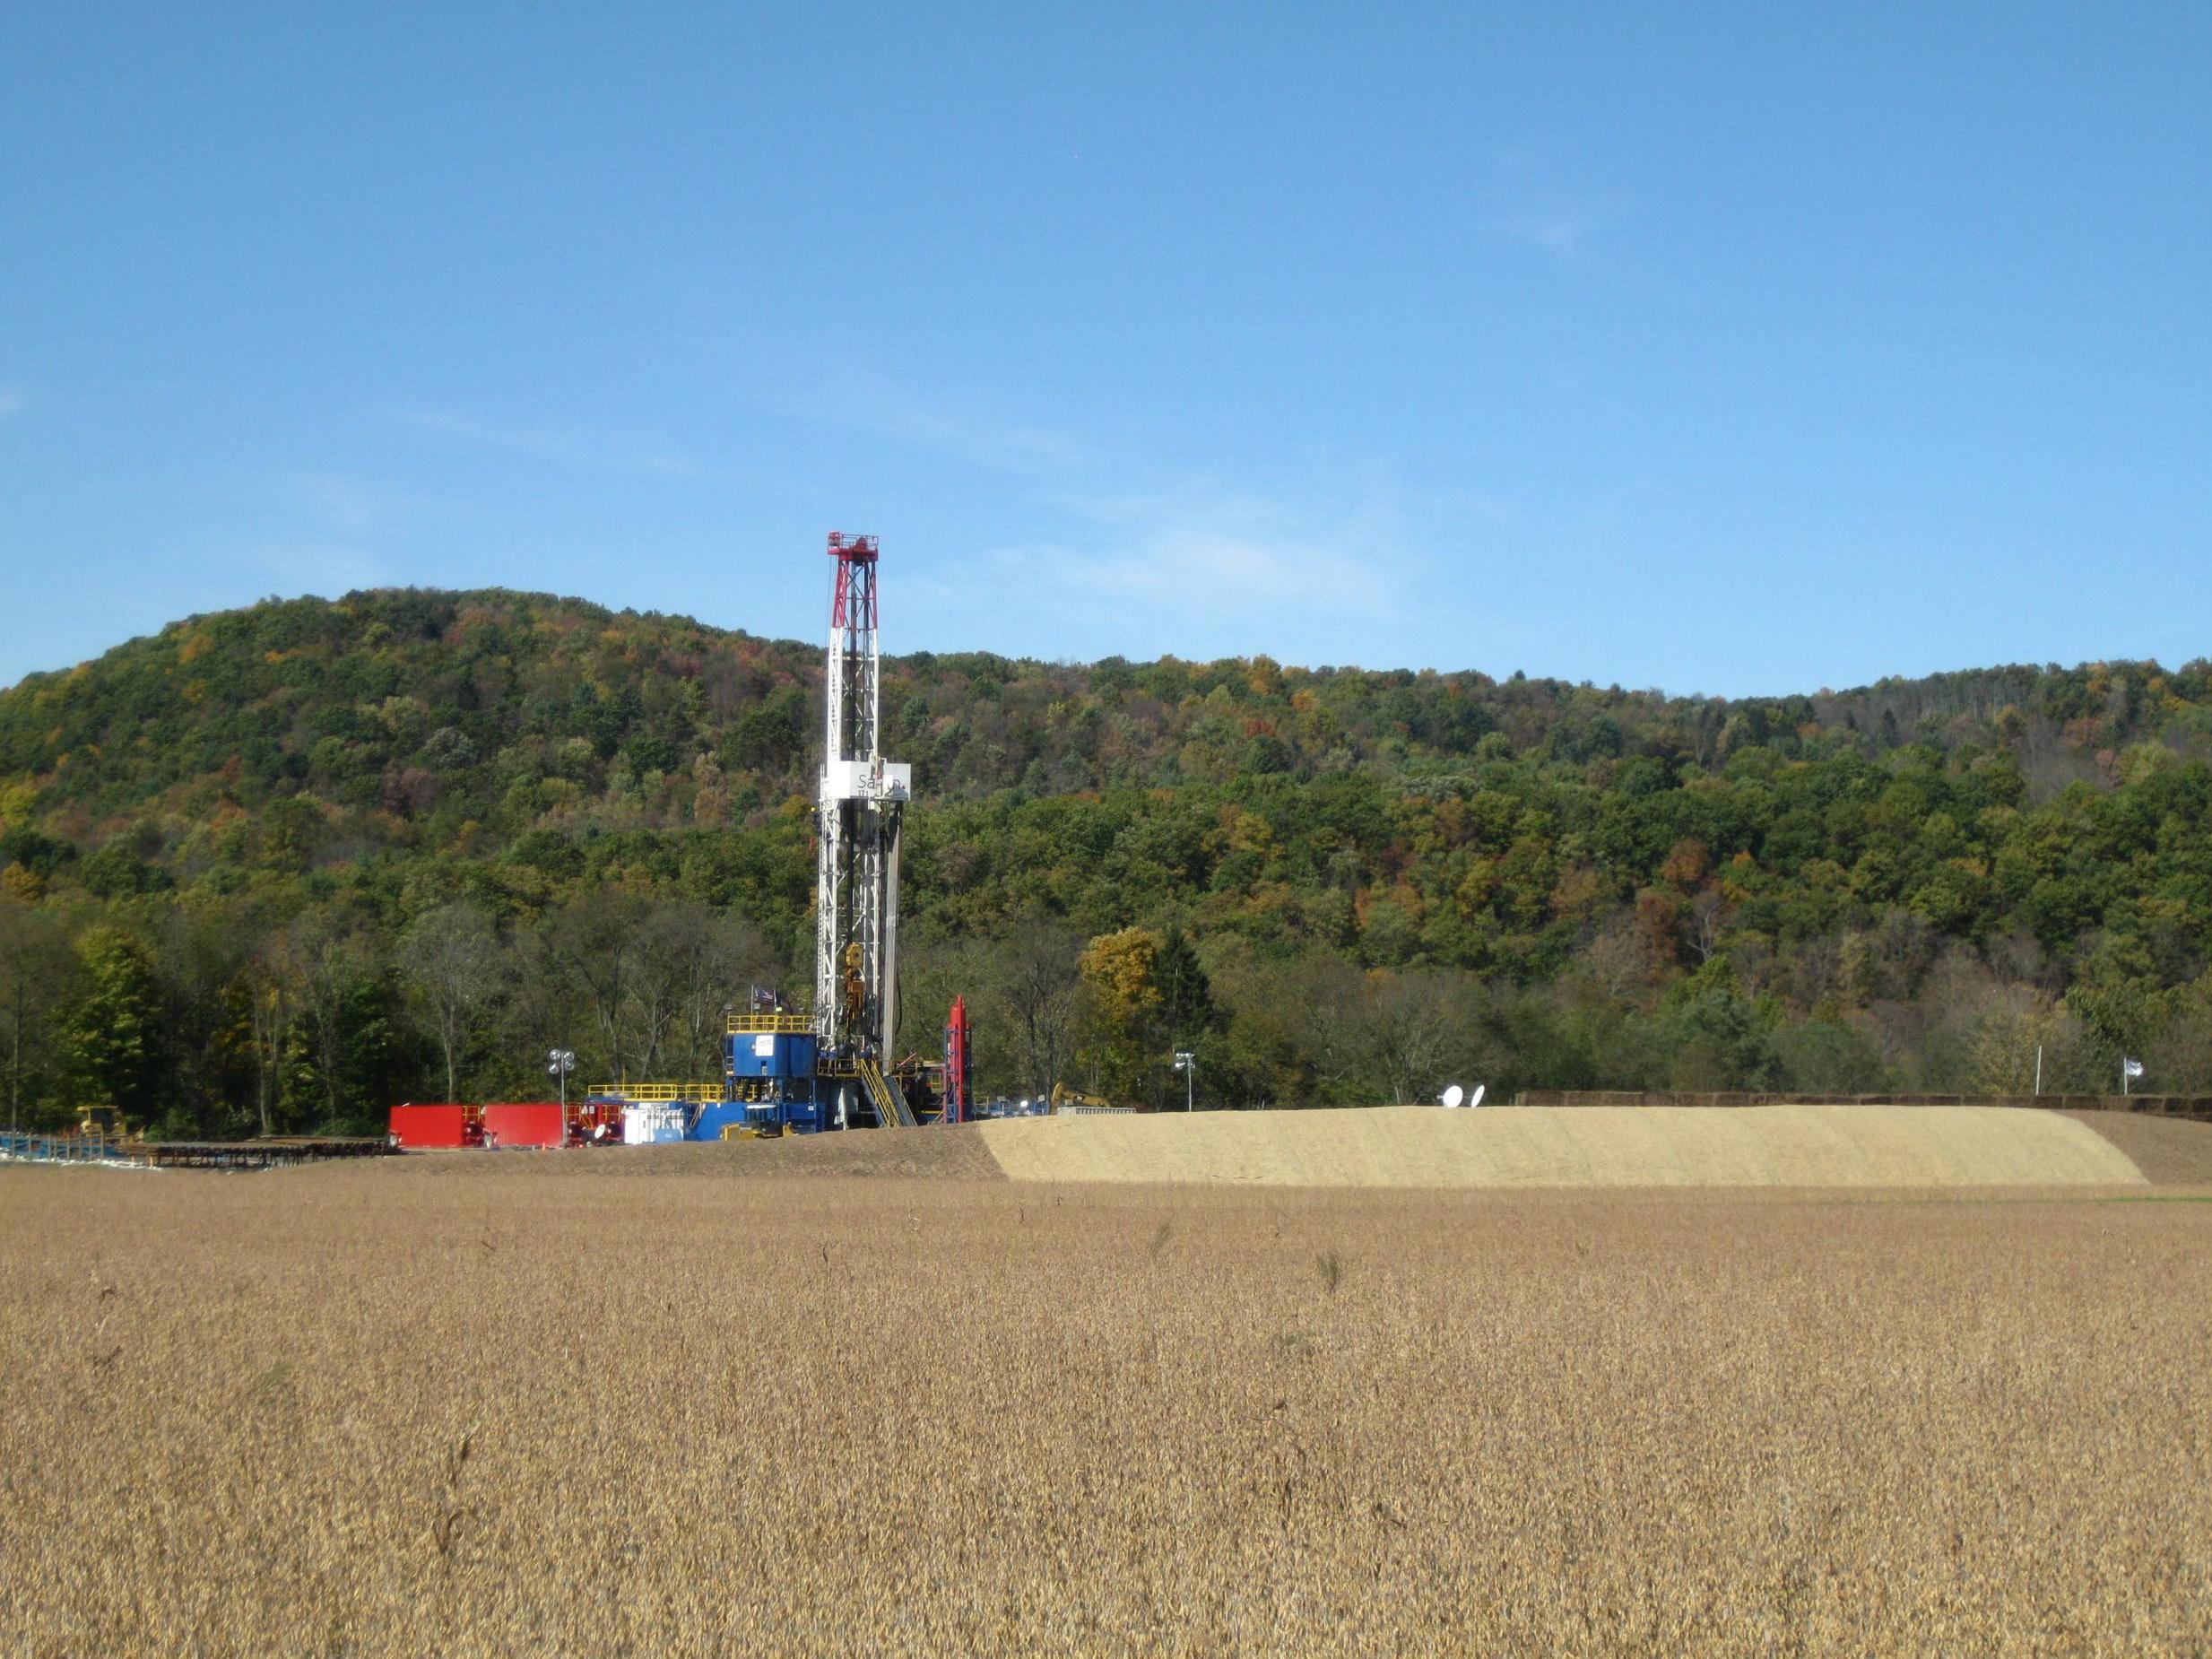 Methane from fossil fuels has higher concentrations of the heavier carbon-13. Pictured is a shale gas tower in Pennsylvania